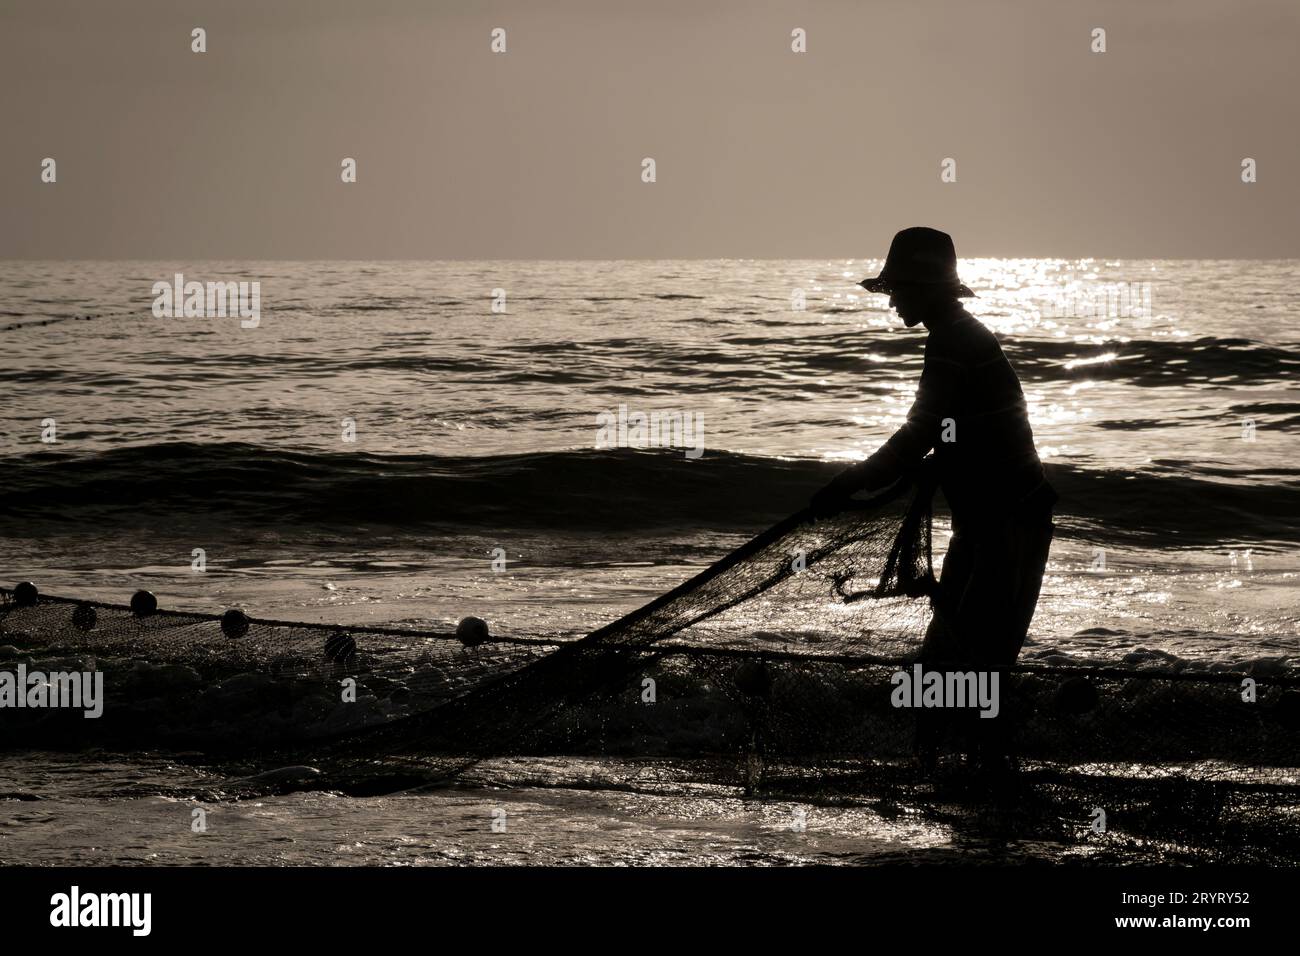 Fujairah, UAE - October 10, 2014: Fishermen with their catch on the beach at Fujairah in the United Arab Emirates. Stock Photo